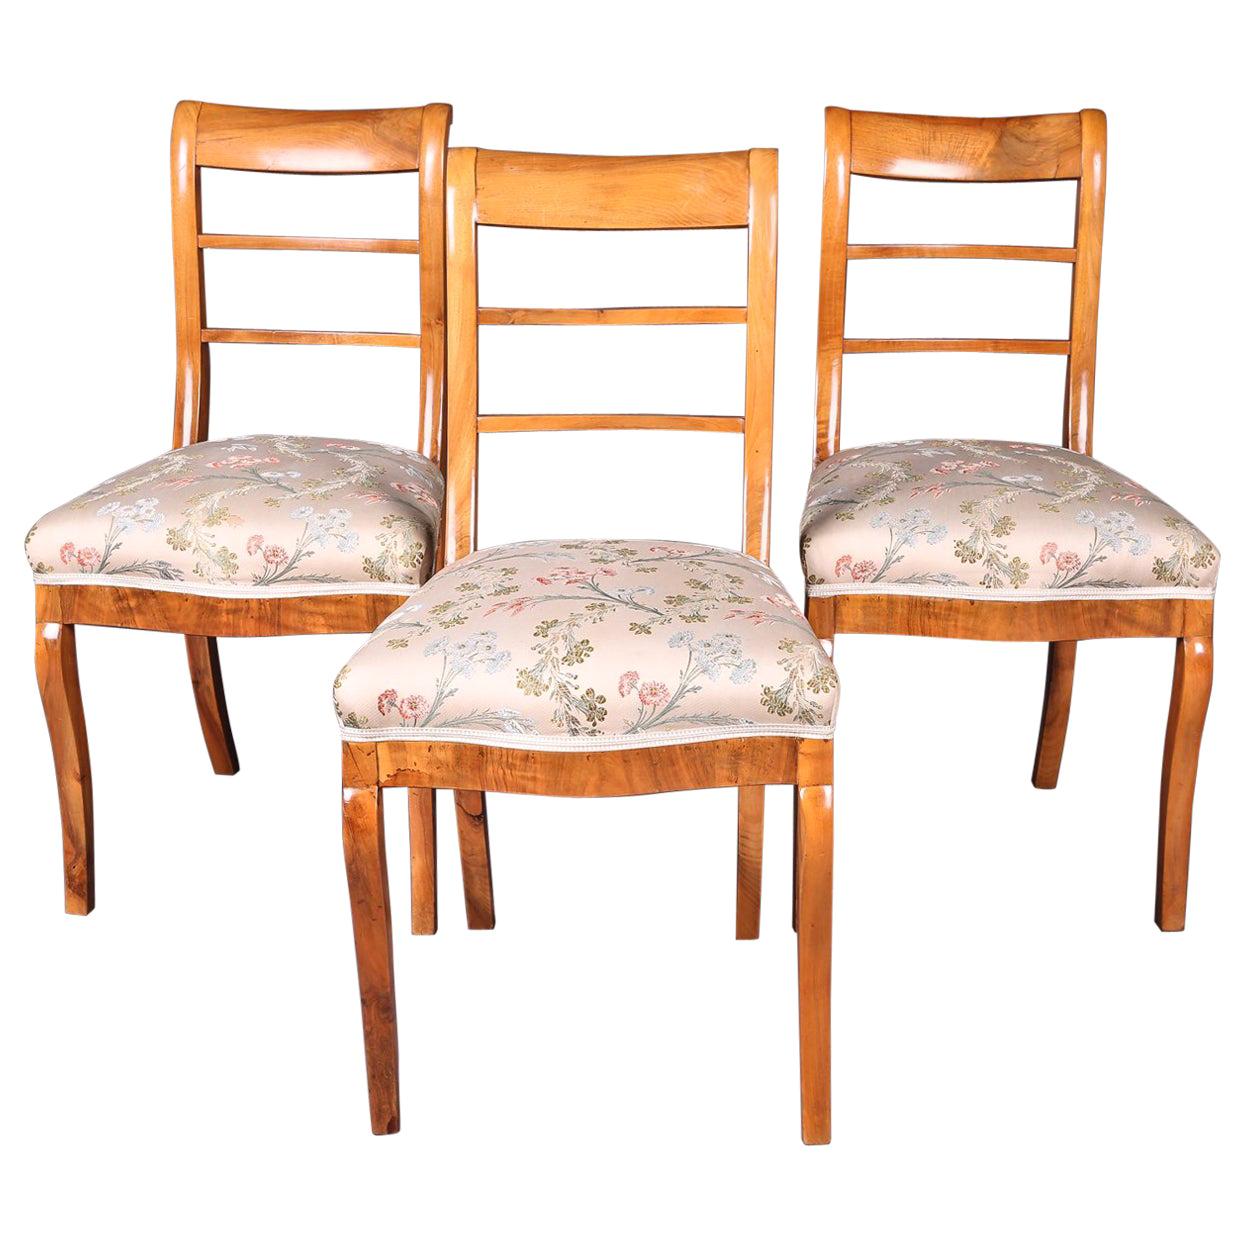 Early 19th Century Three Biedermeier Curved Legs Set of Chairs For Sale